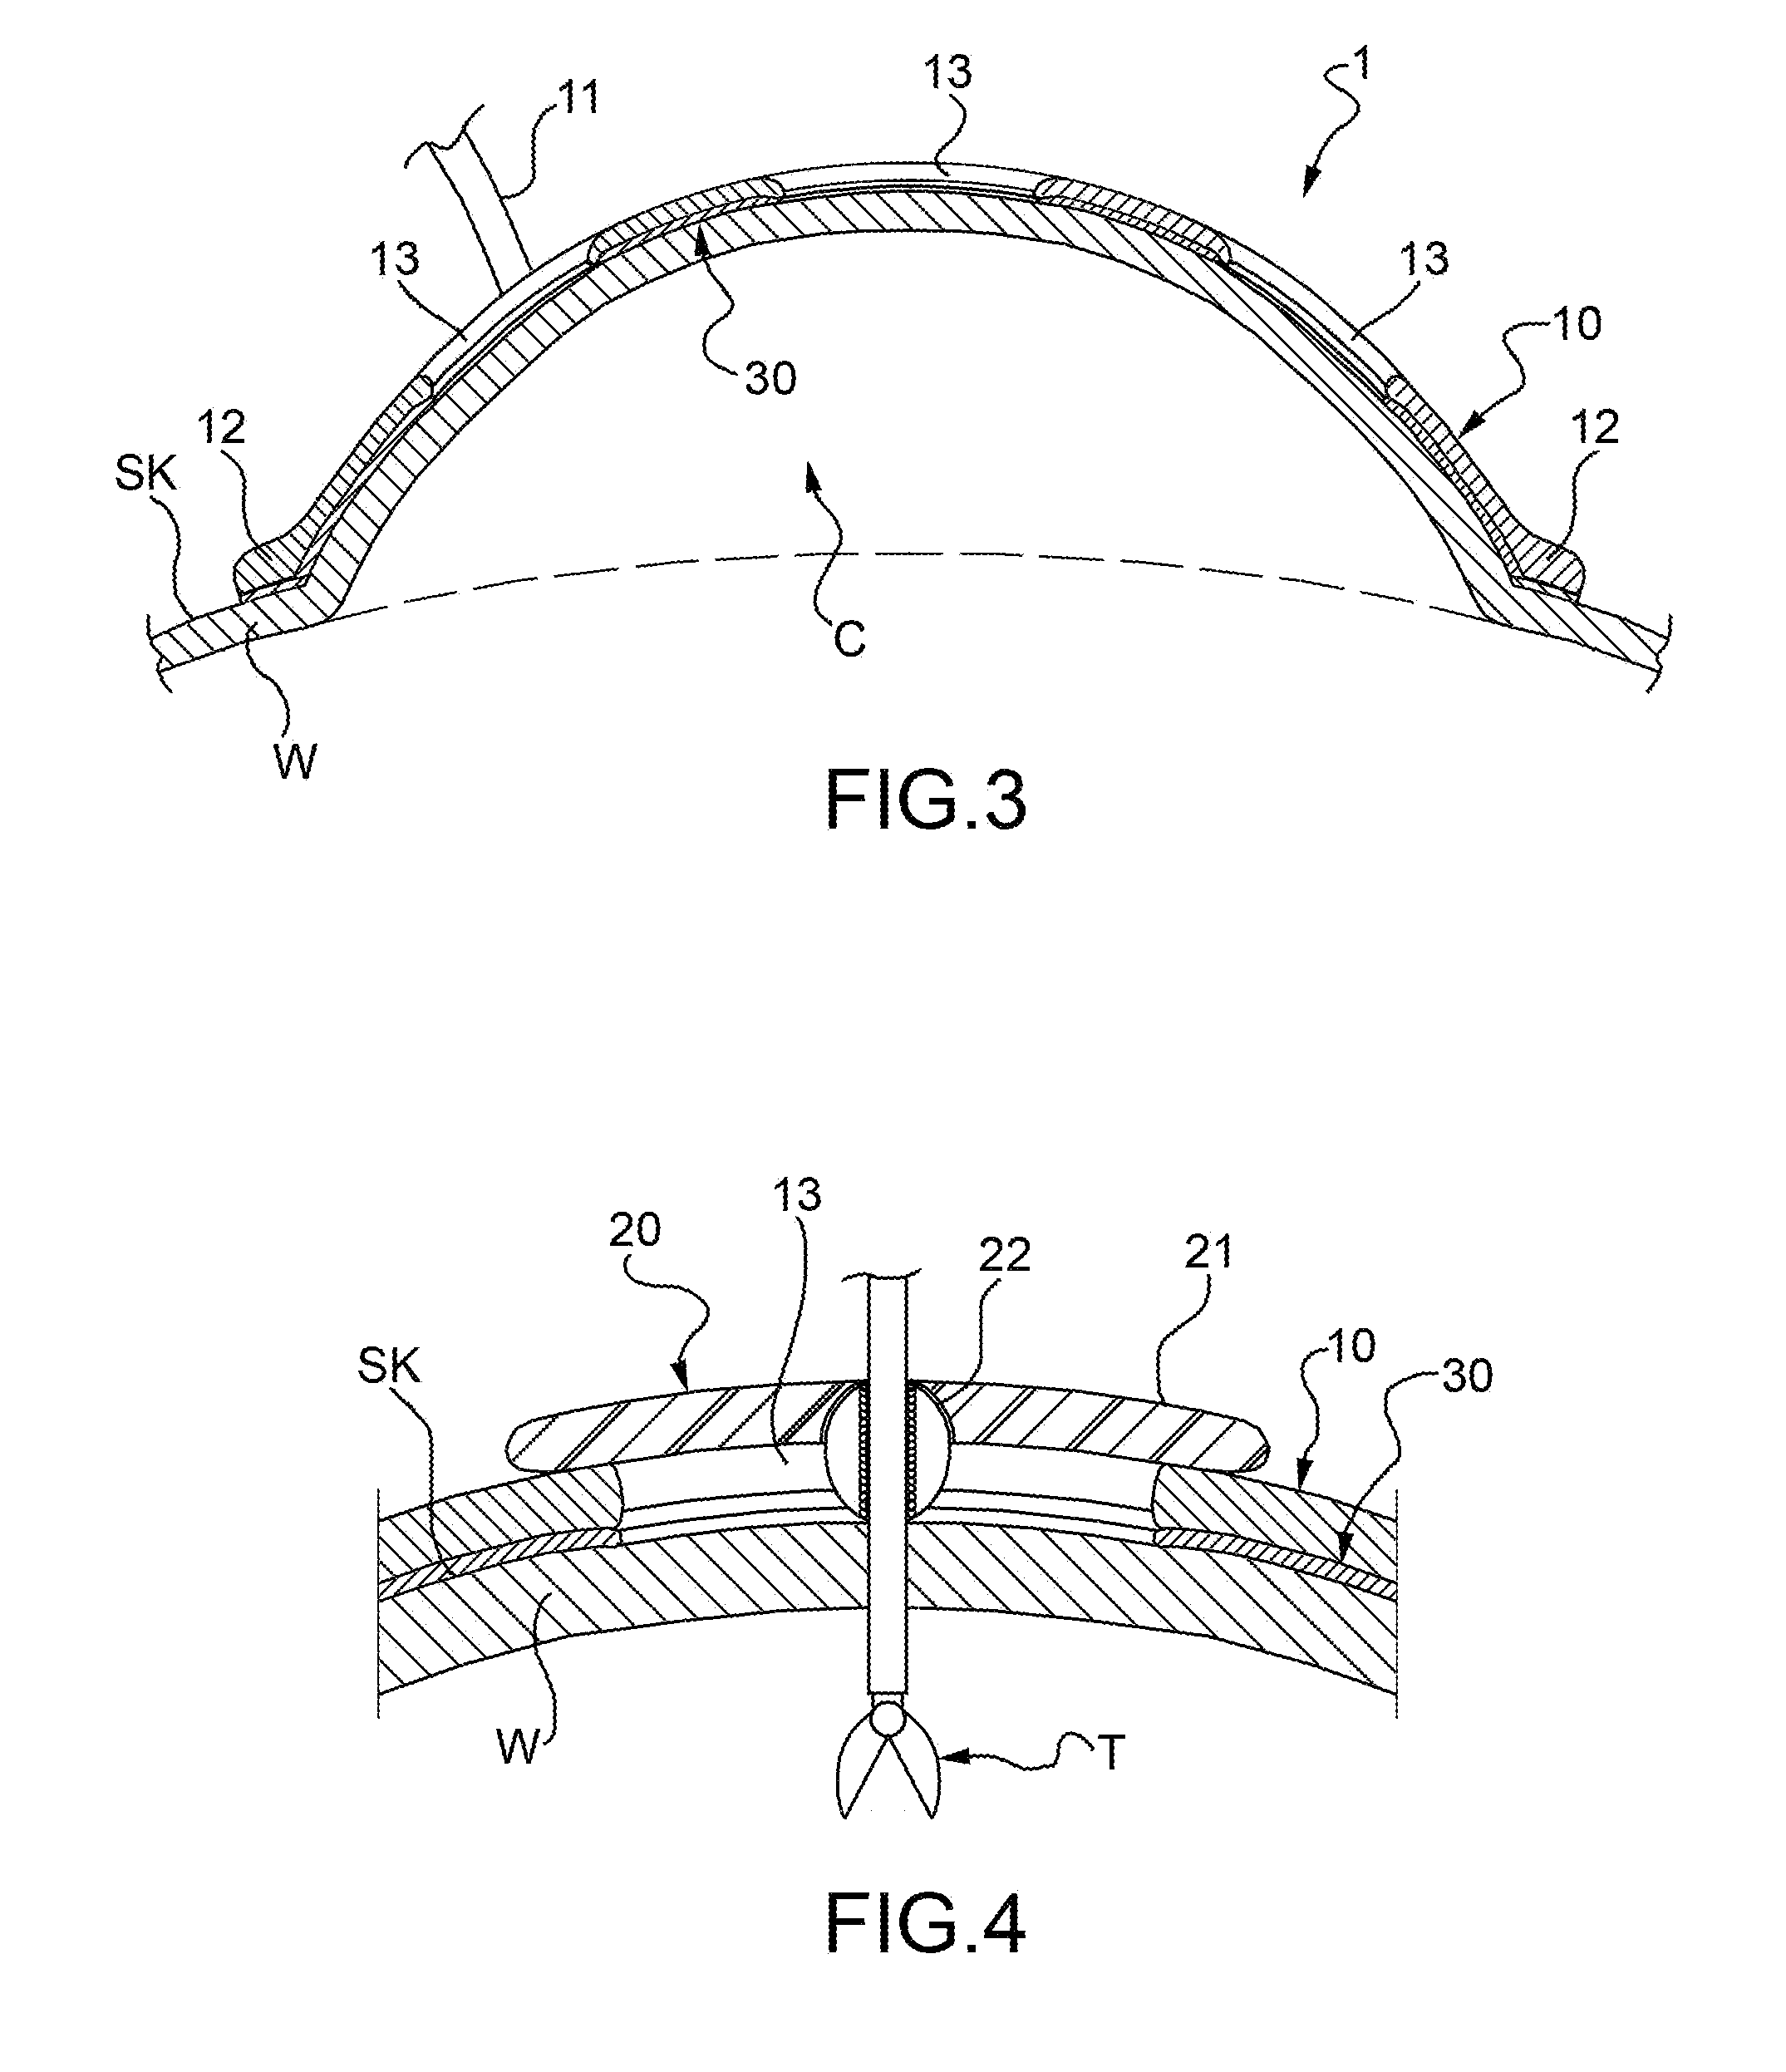 Surgical lift device to assist in surgical access through skin, tissue and organs